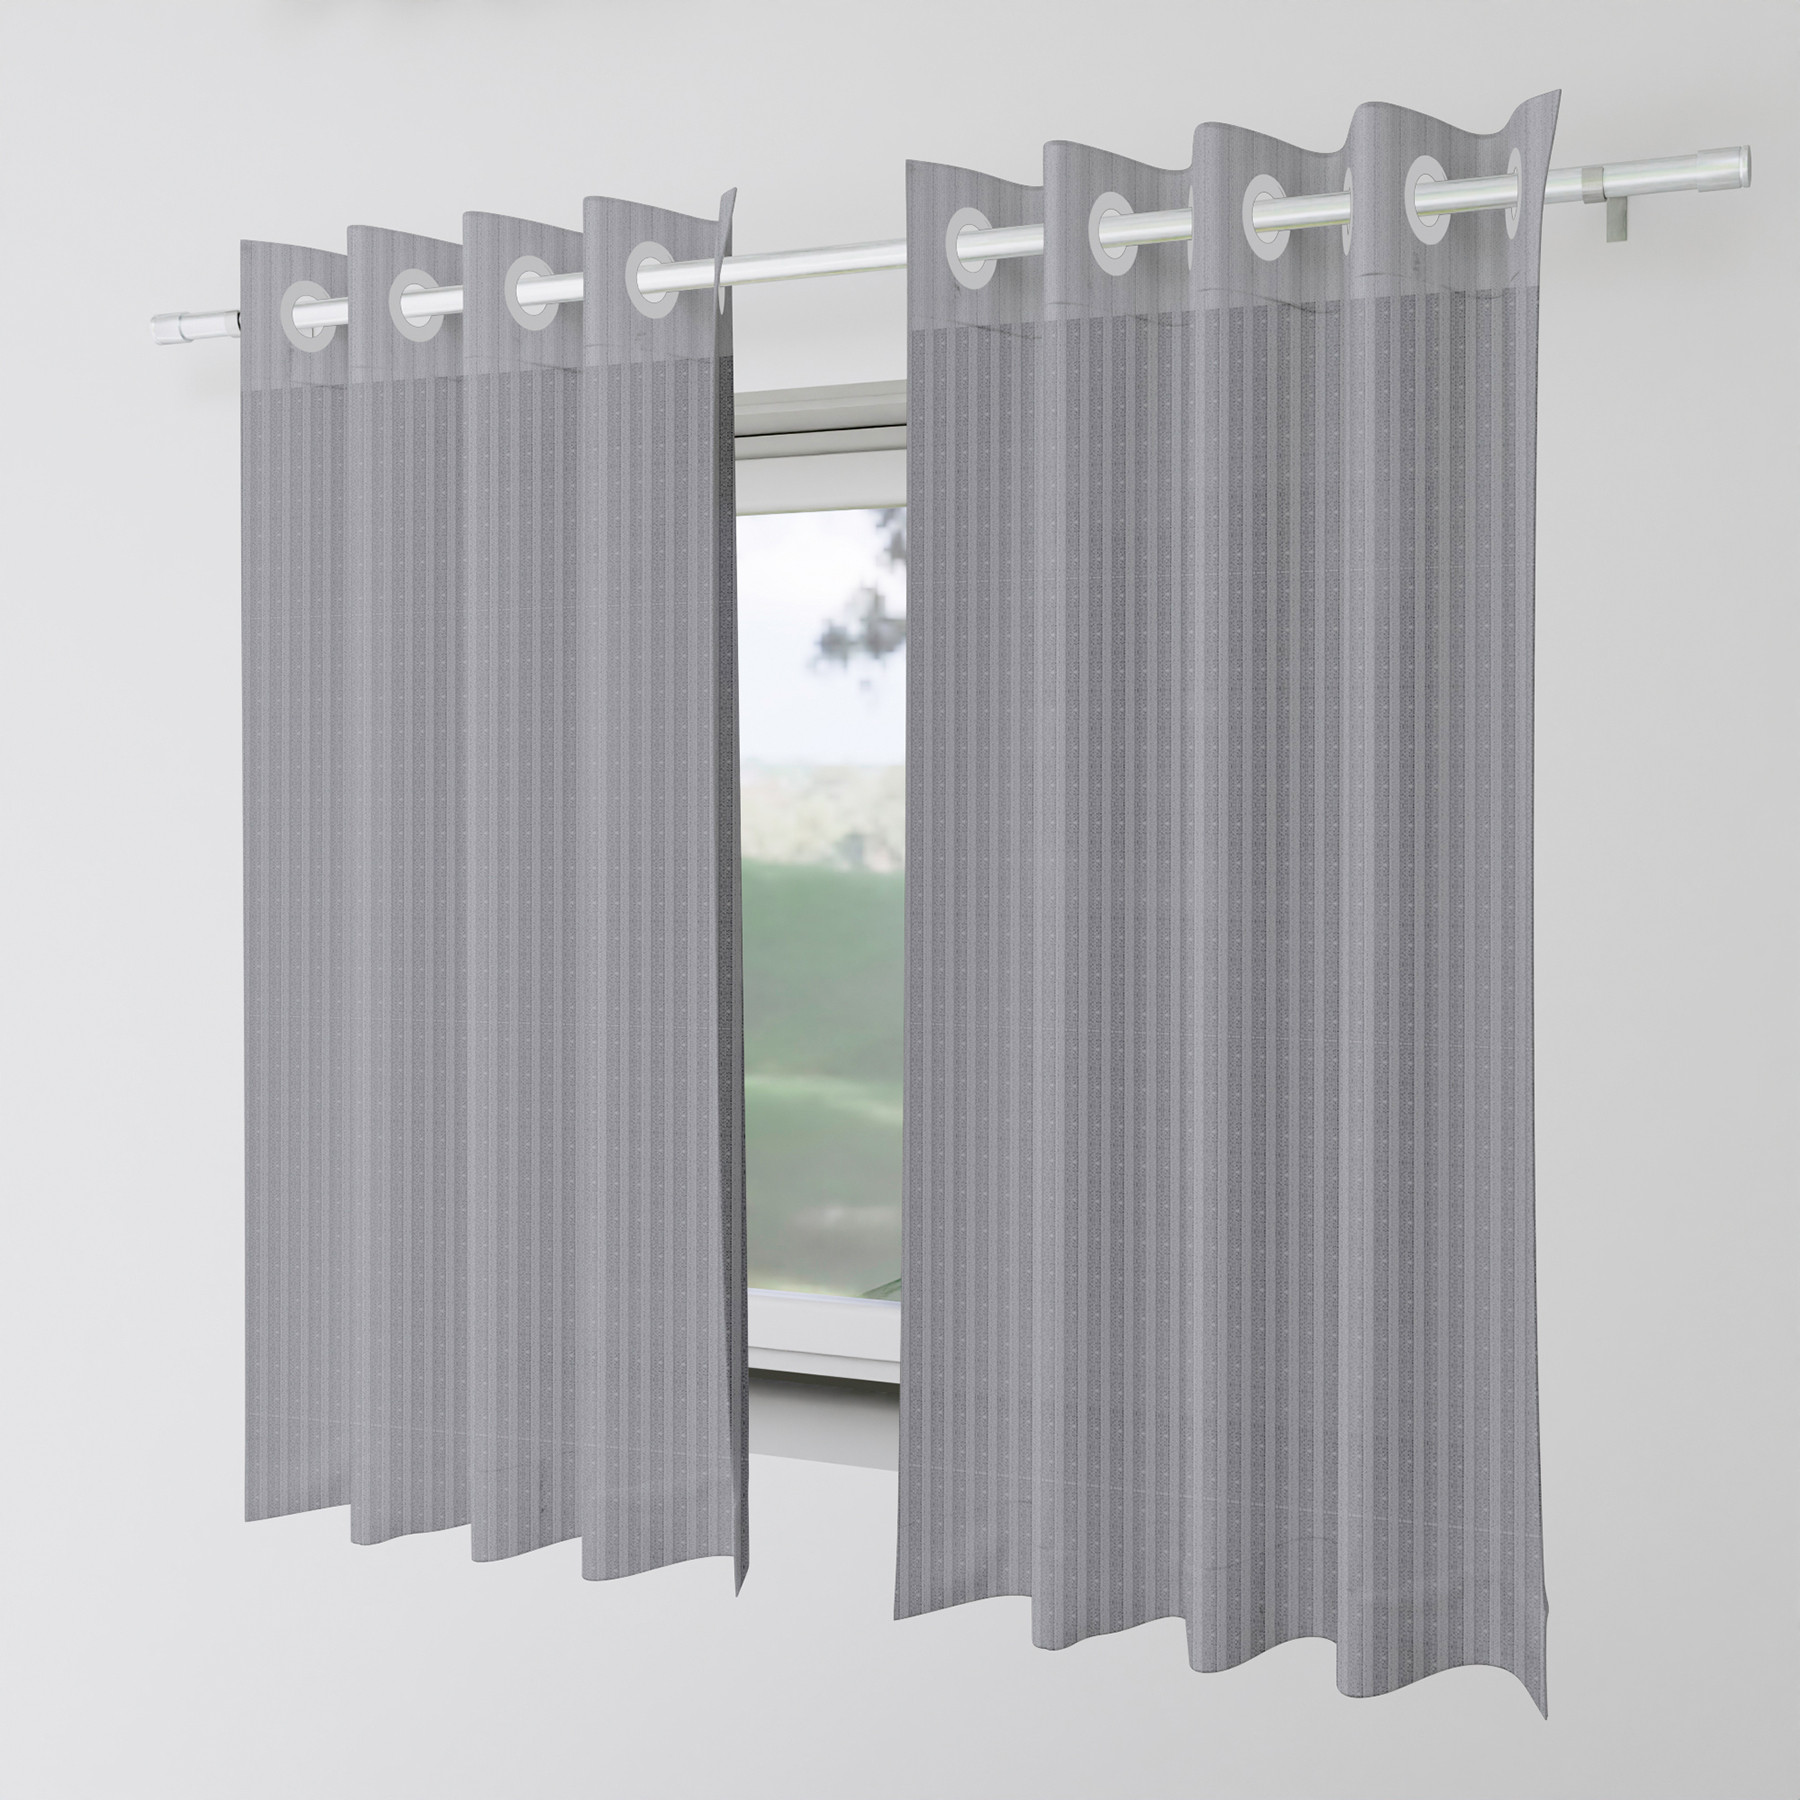 Kuber Industries Window Curtain | Sheer Window Curtains | Parda for Living Room | Drapes for Bedroom | Window Curtain Parda for Home Décor | Lining Net | 5 Feet | Gray